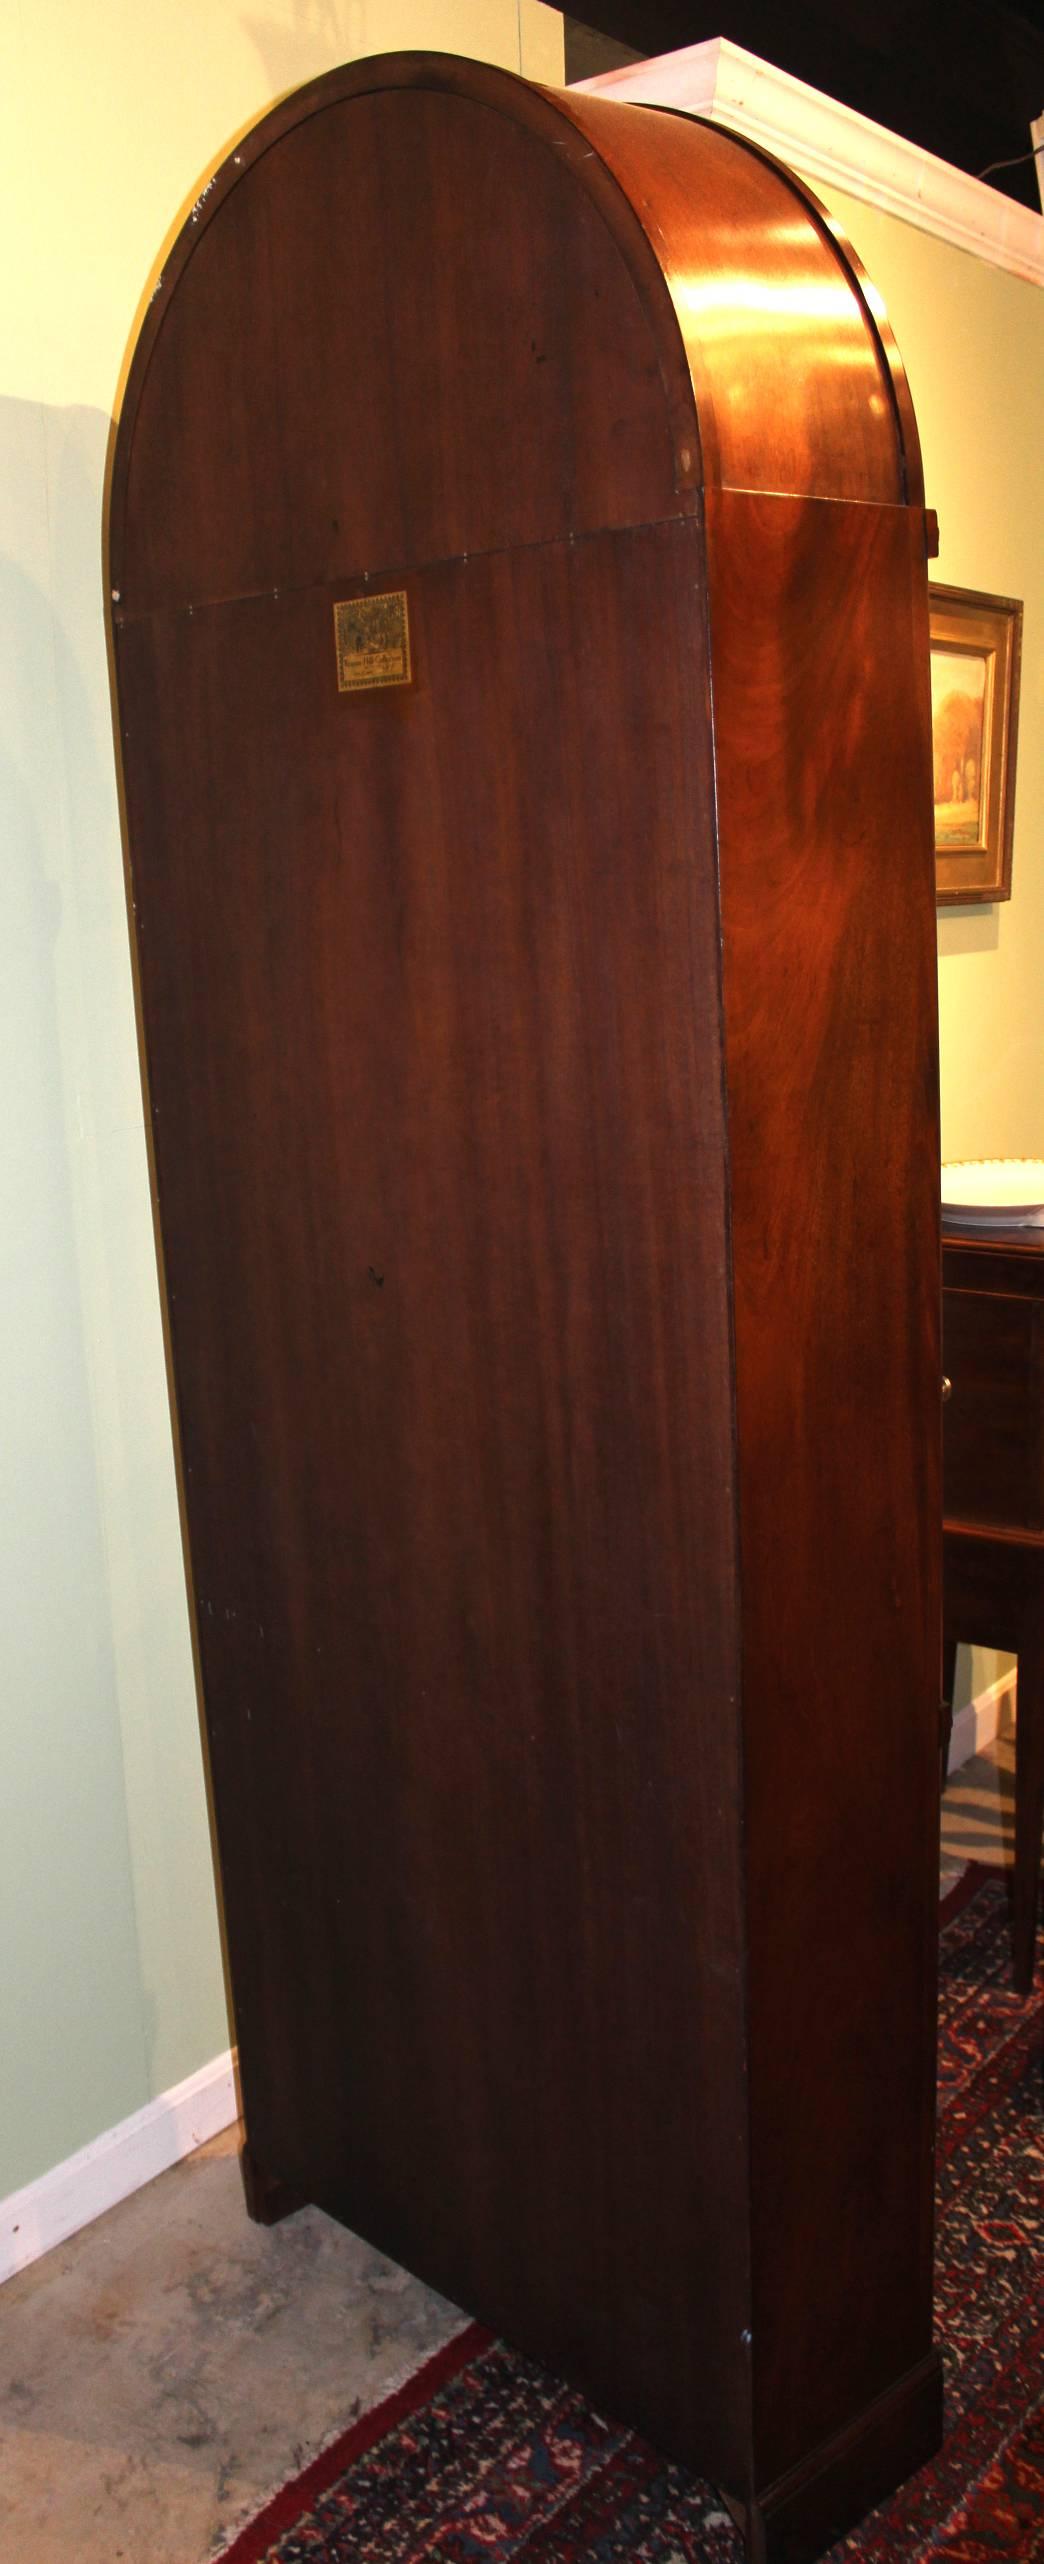 American Pair of Mahogany Kaplan Furniture Beacon Hill Arched Bookcases or China Cabinets